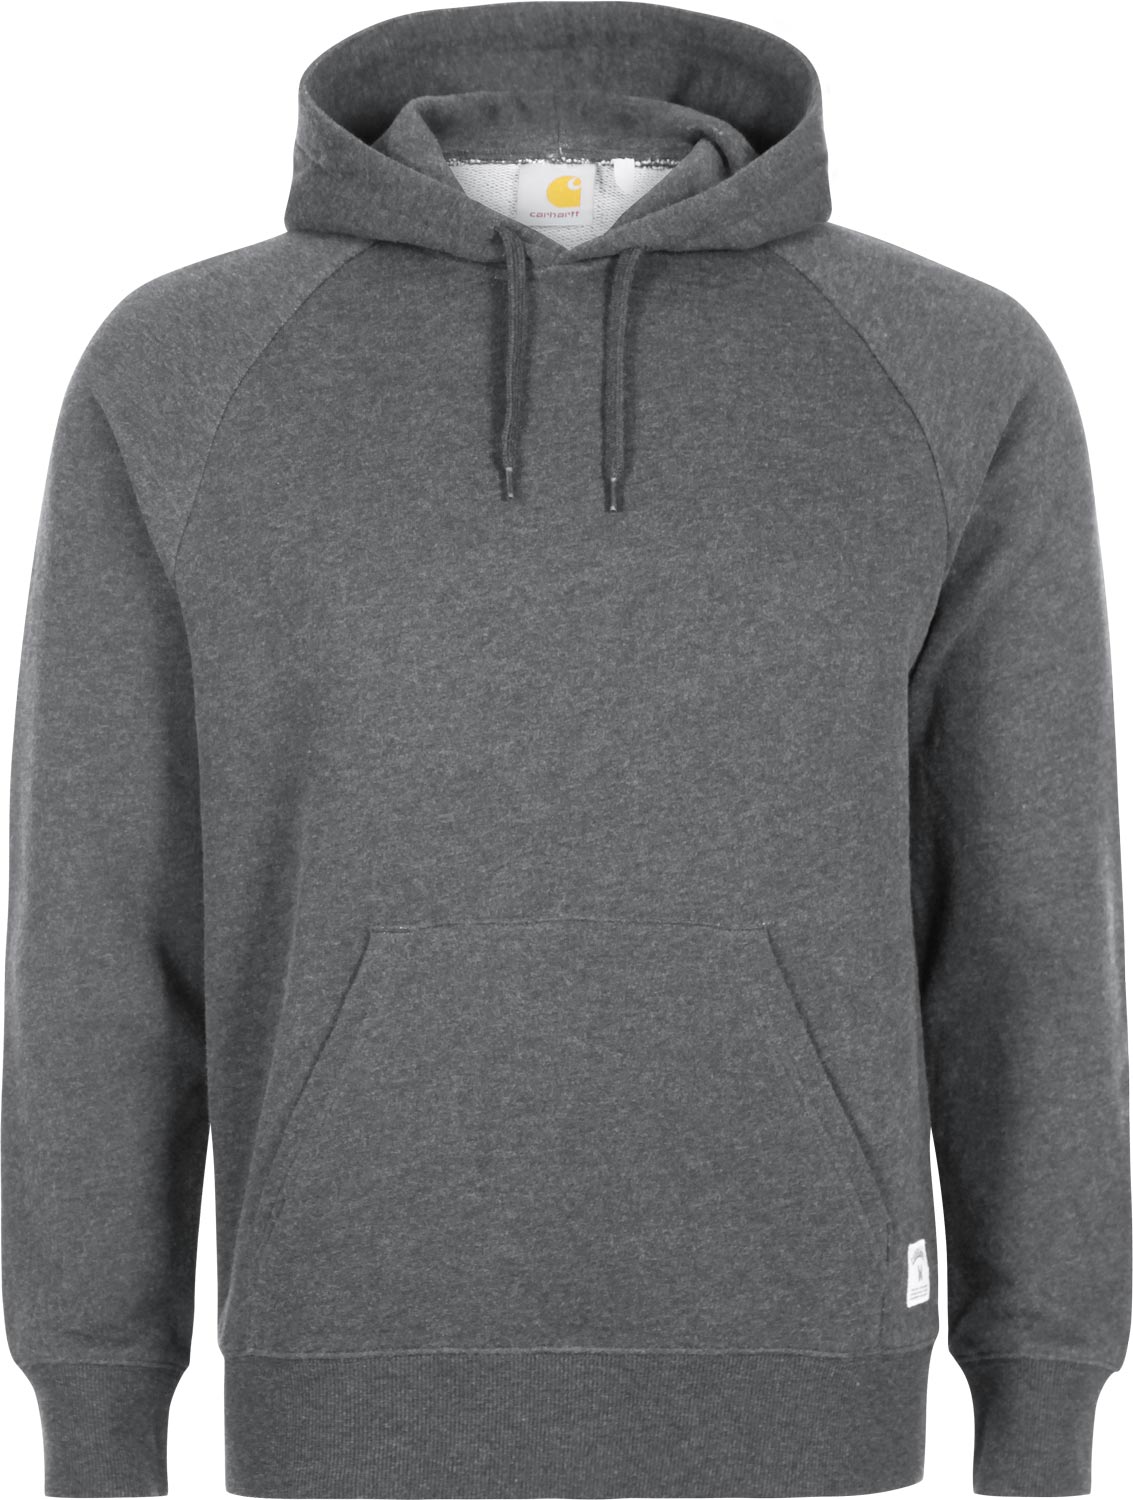 Get Grey Hoodie for Style and Comfort – StyleSkier.com